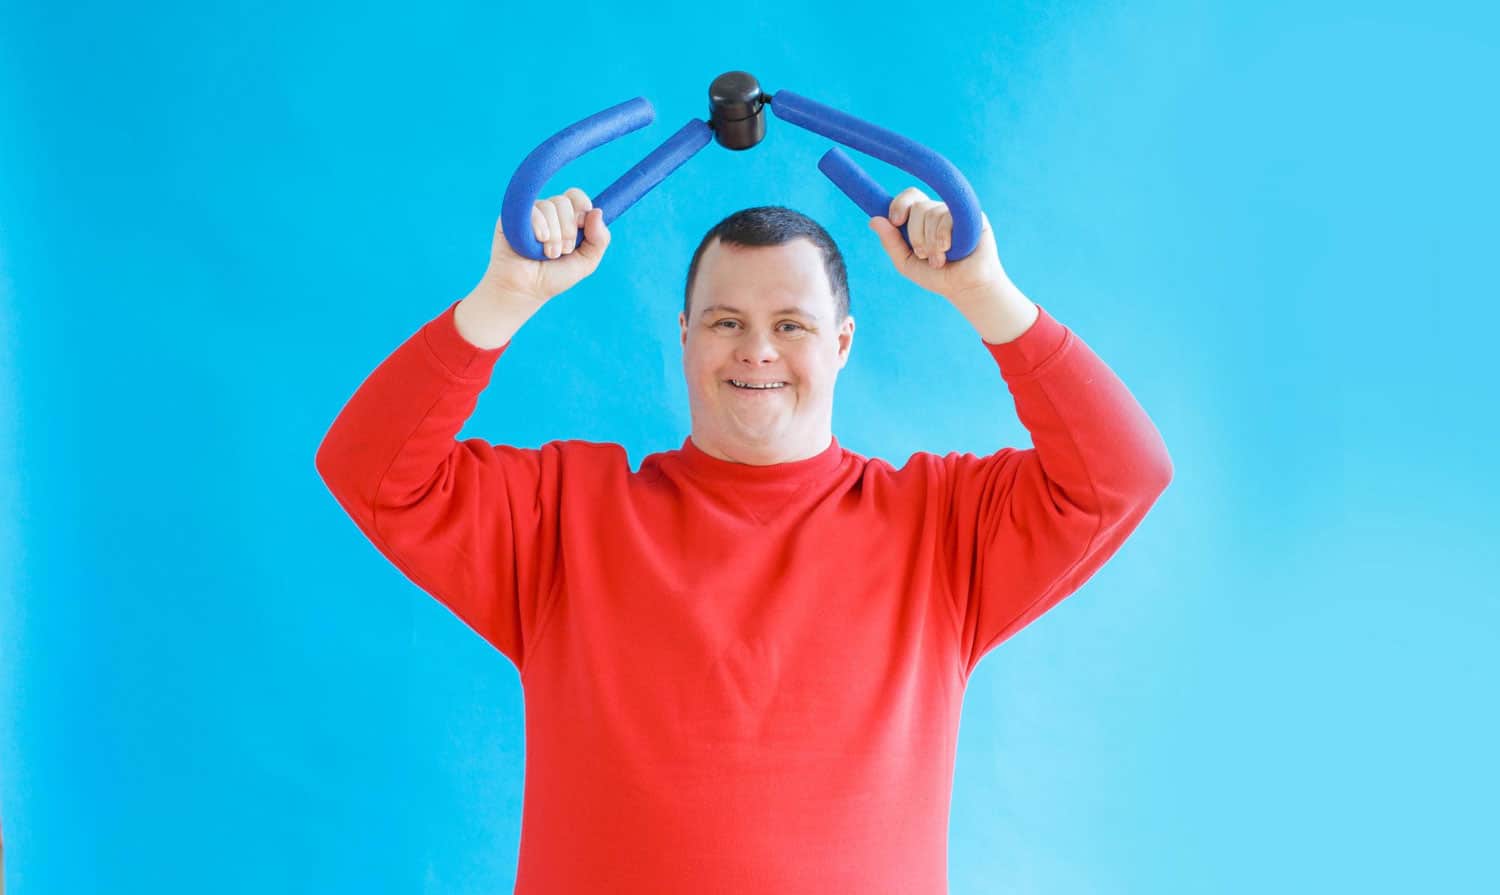 A young man with down syndrome smiles with expanders in his hands